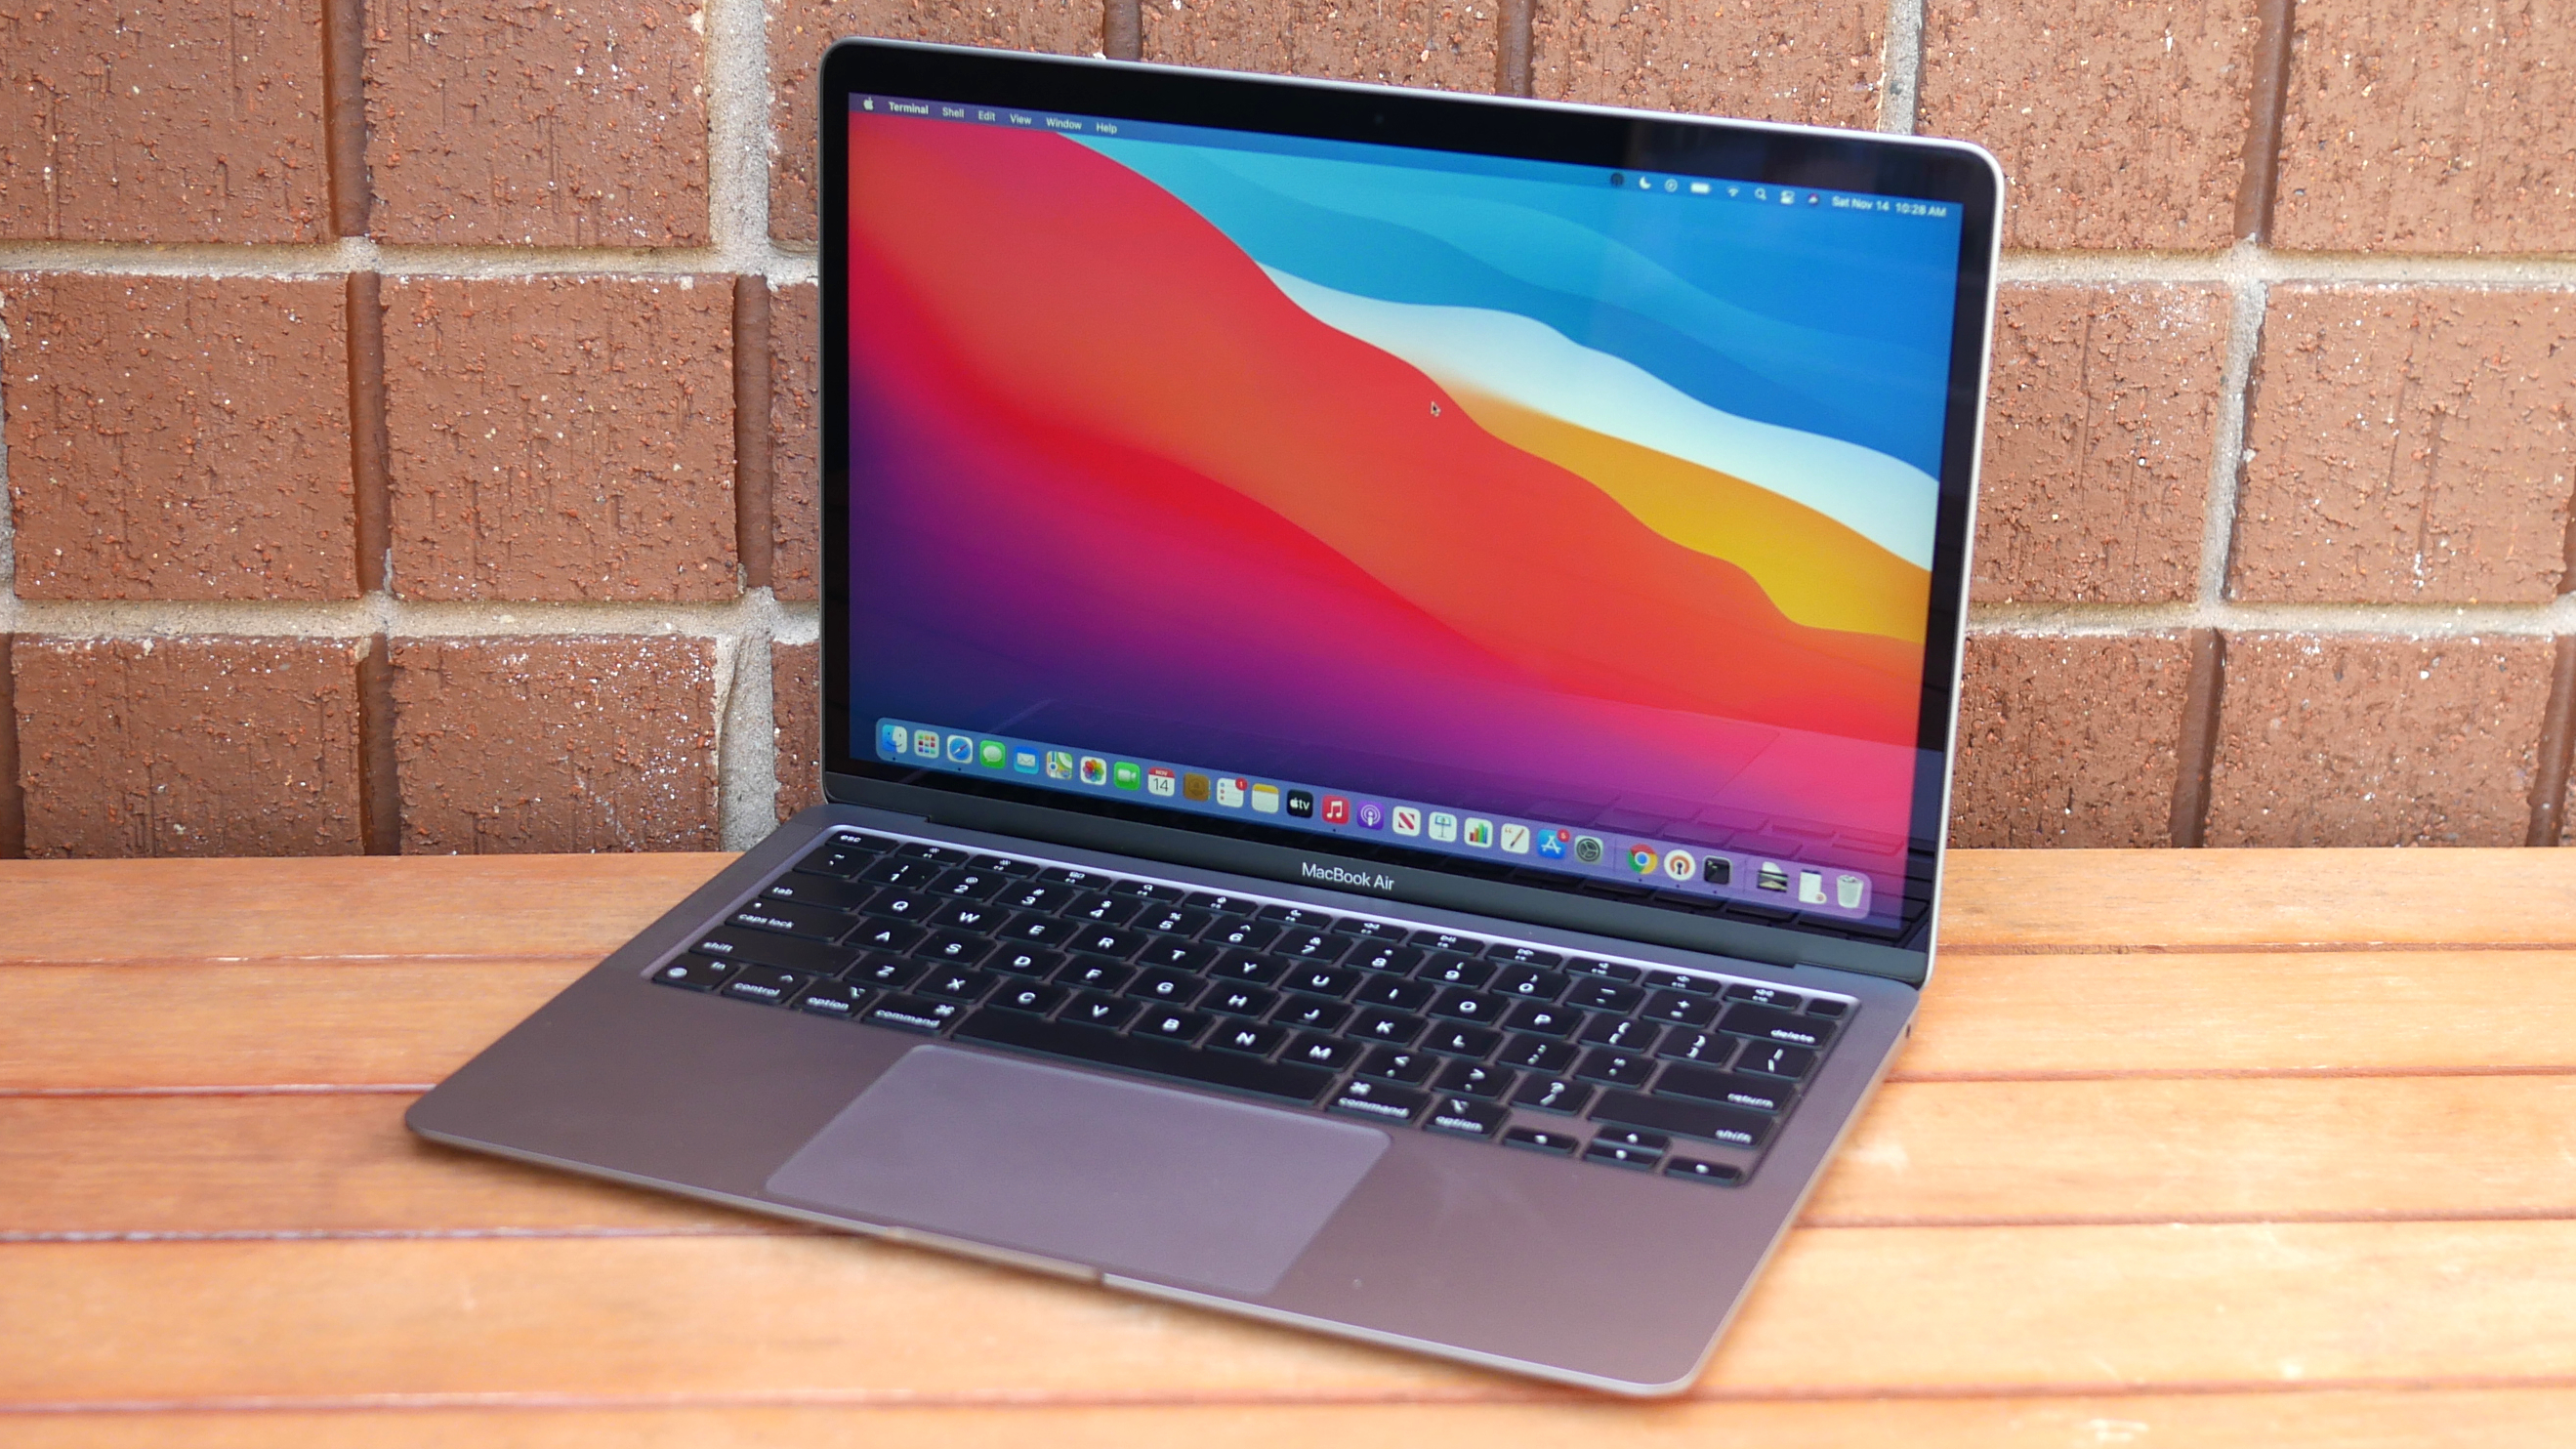 MacBook Air laptops with best battery life